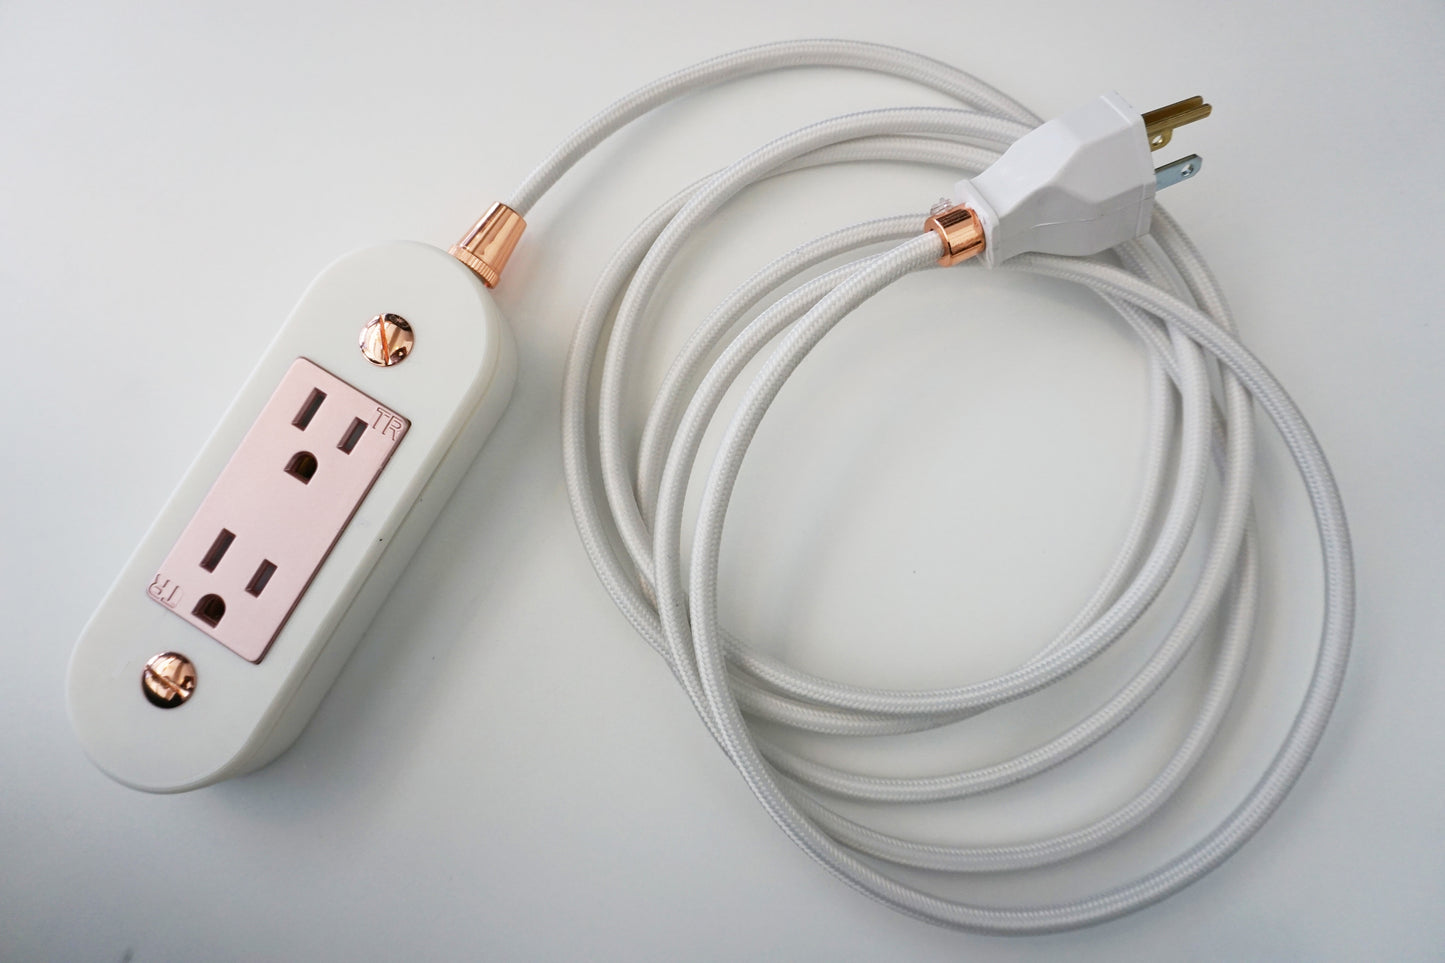 White & Rose Gold Wall Outlet Extension Cord